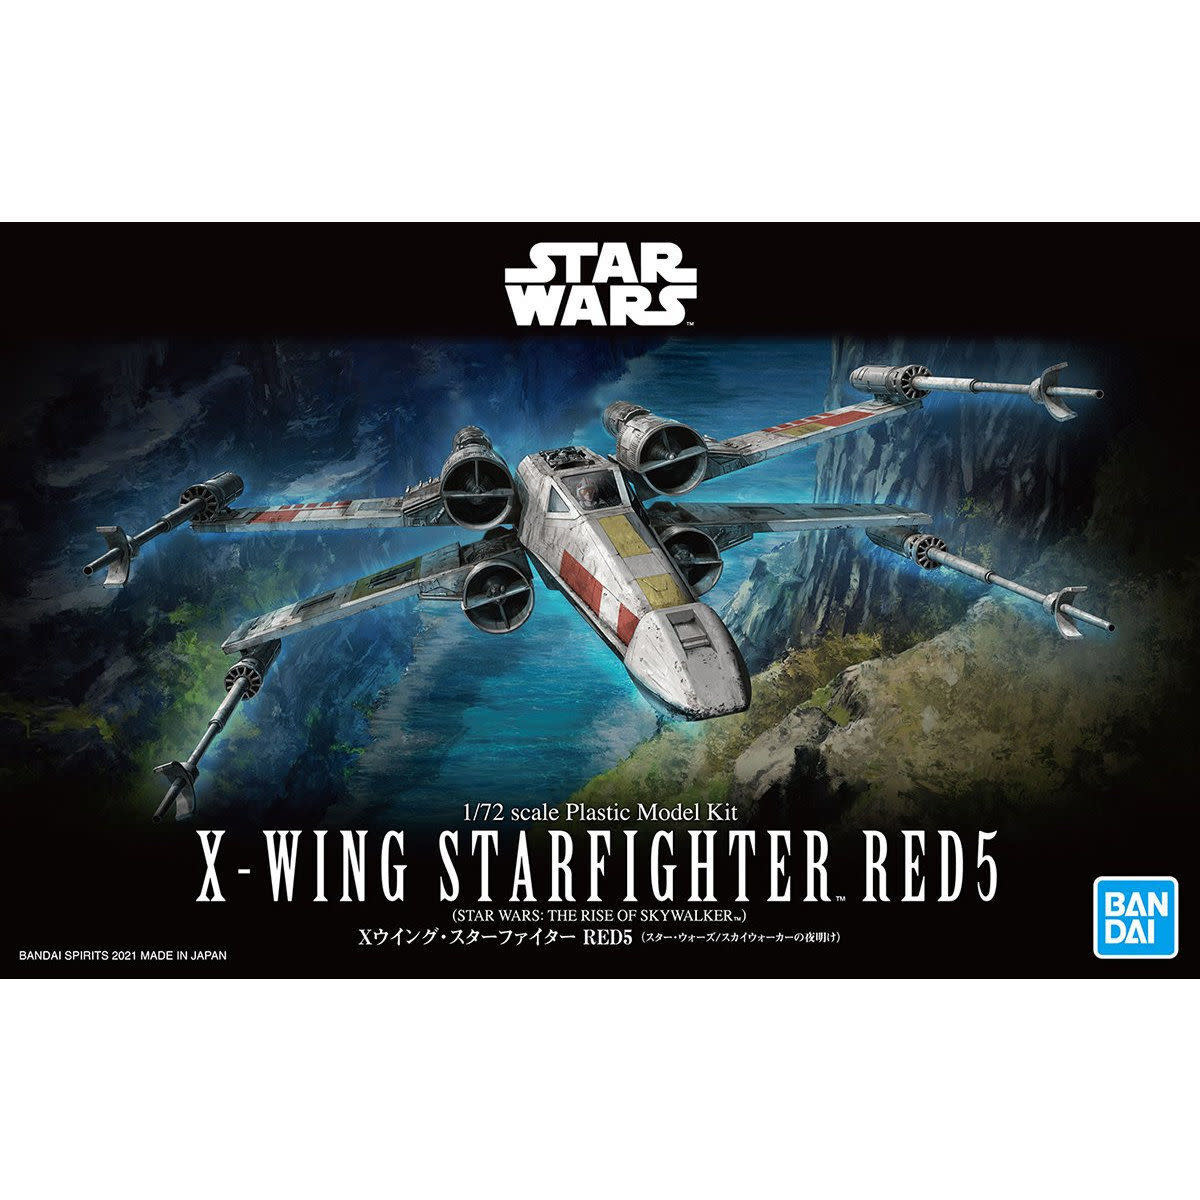 Plastic Kits BANDAI STAR WARS 1/72 Scale - X-Wing Starfighter Red 5 (Starwars: The Rise of Skywalker)